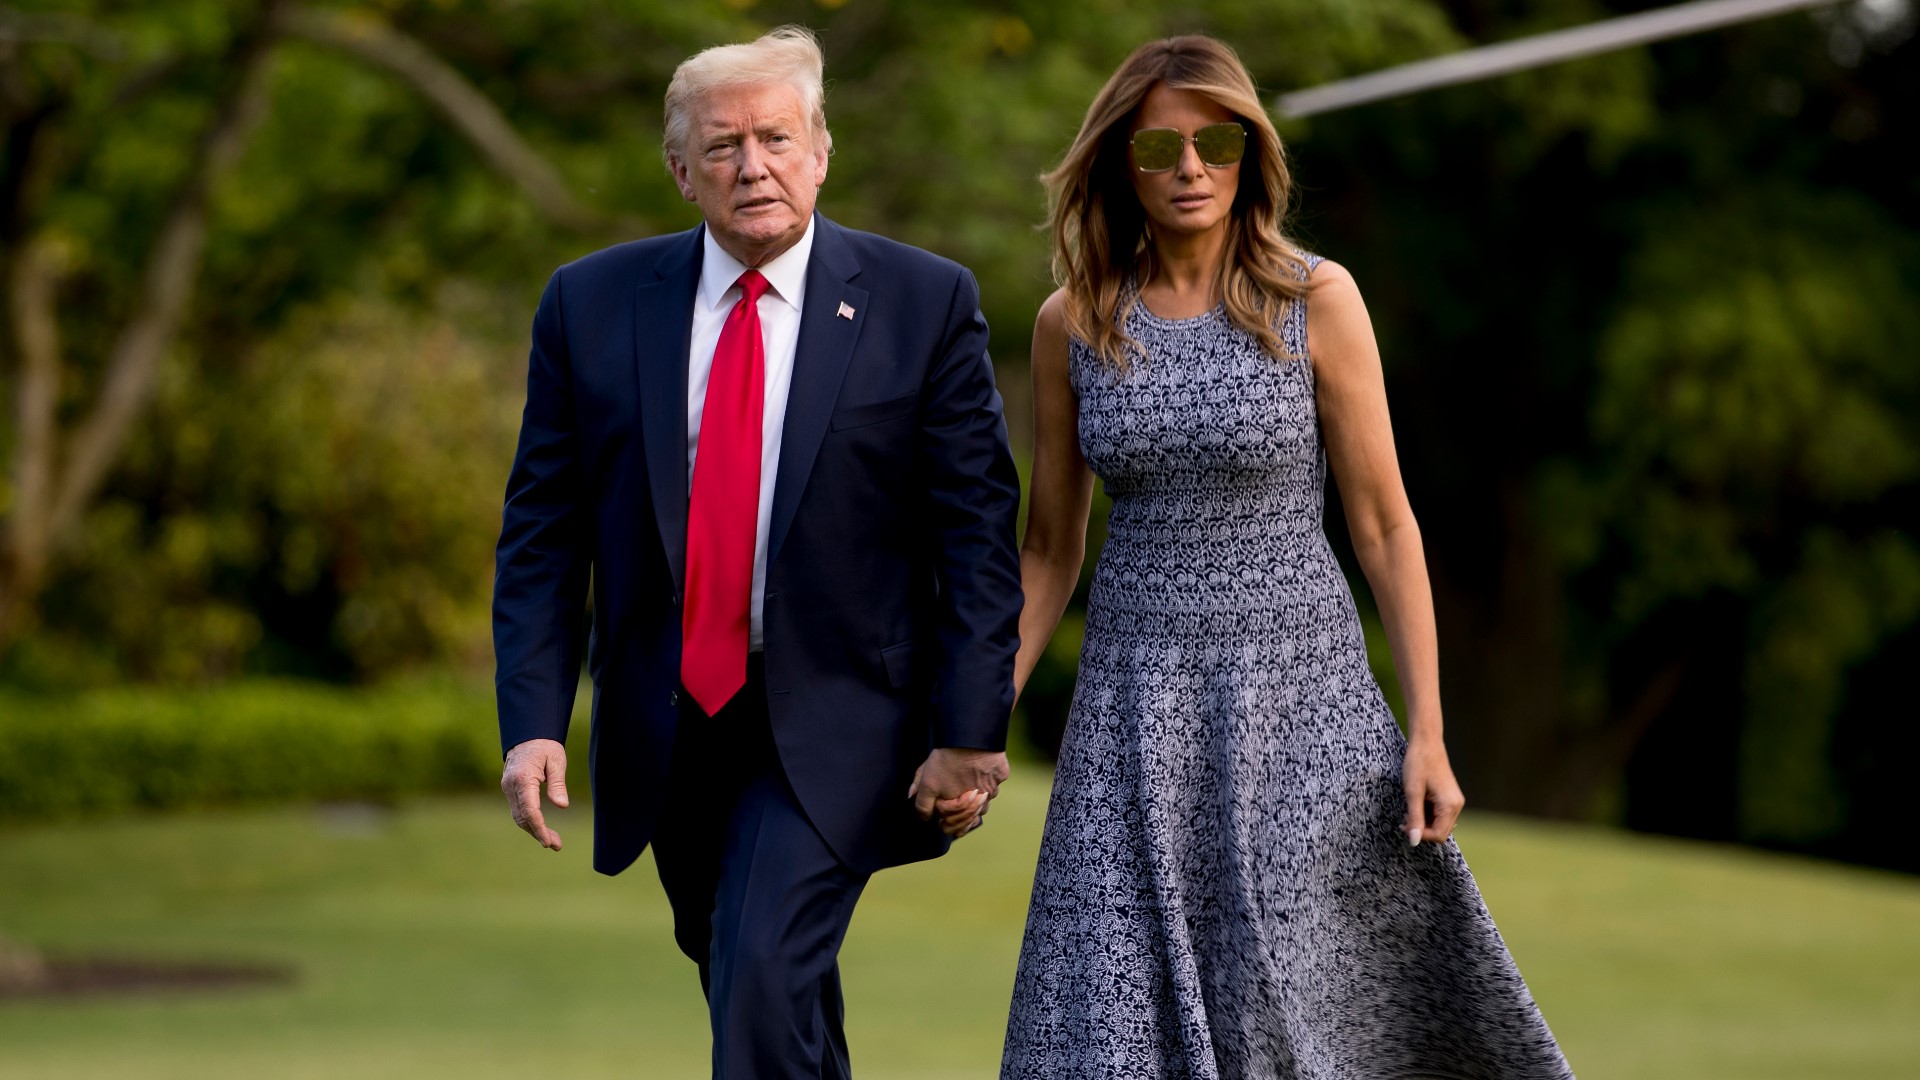 President Donald Trump said early Friday that he and the first lady have tested positive for COVID-19. We take a look at what that means for the election.